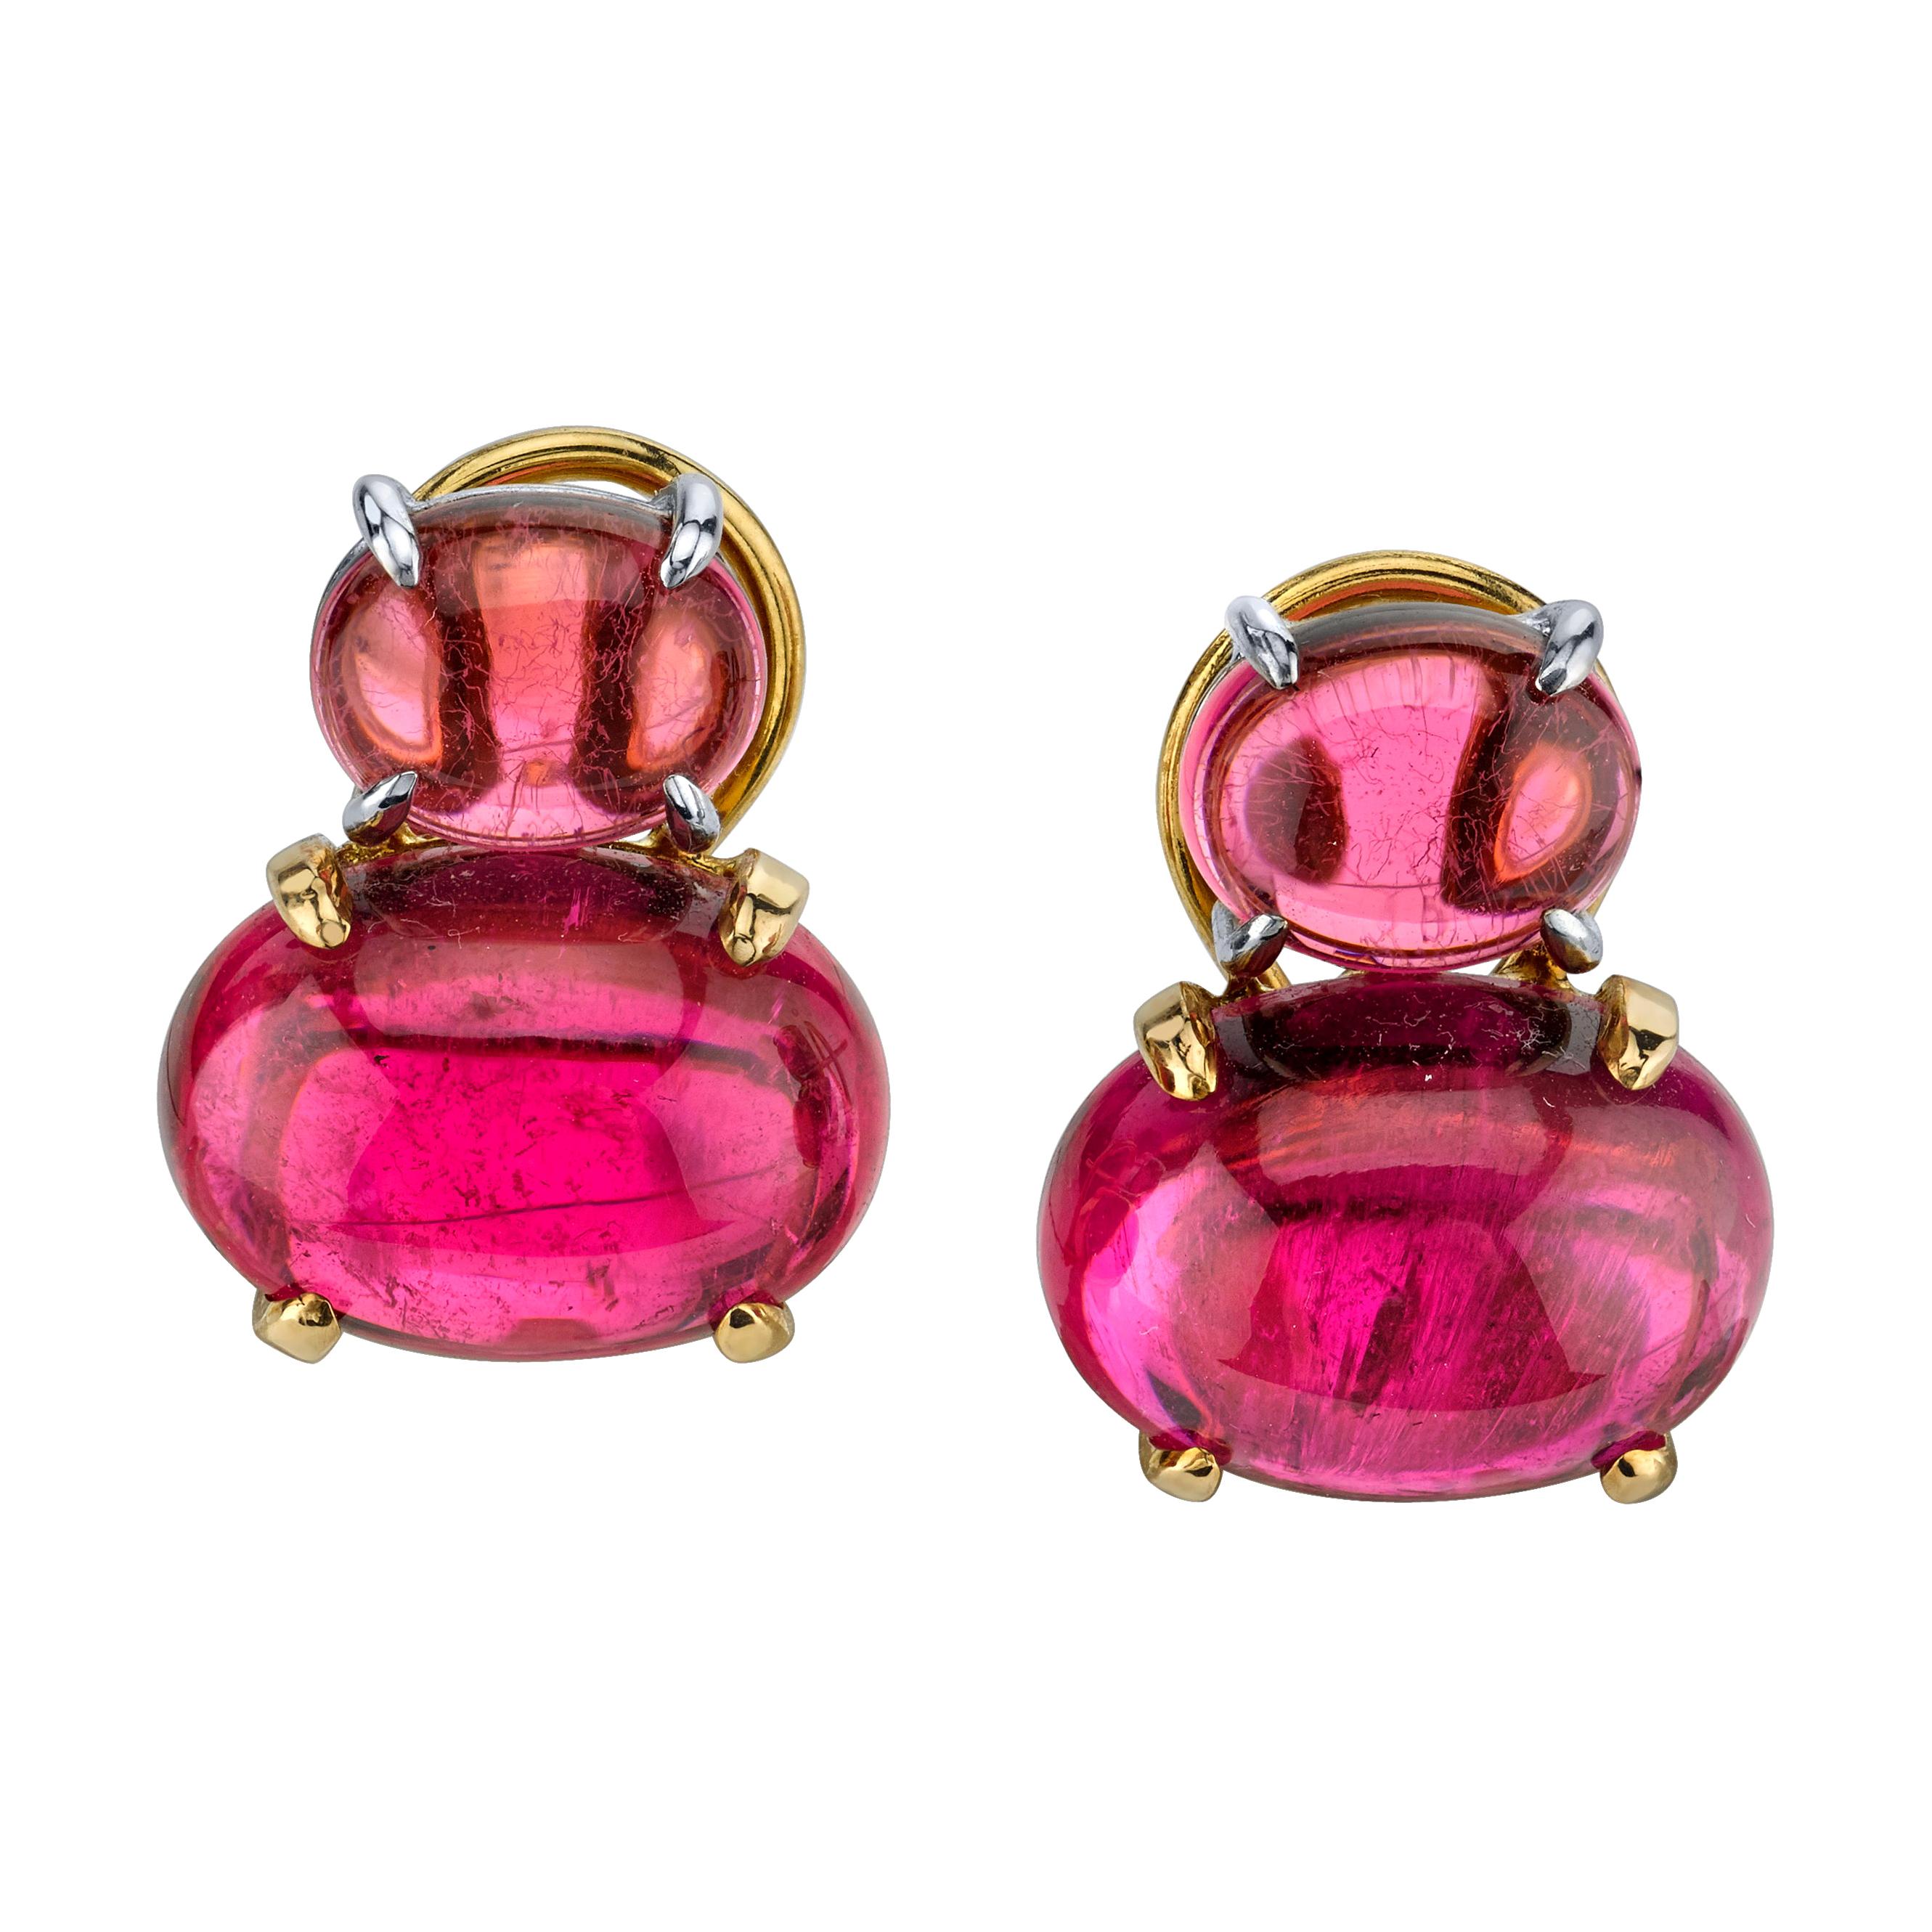 17.21 Carat Rubellite Tourmaline Cabochon Yellow White Gold French Clip Earrings